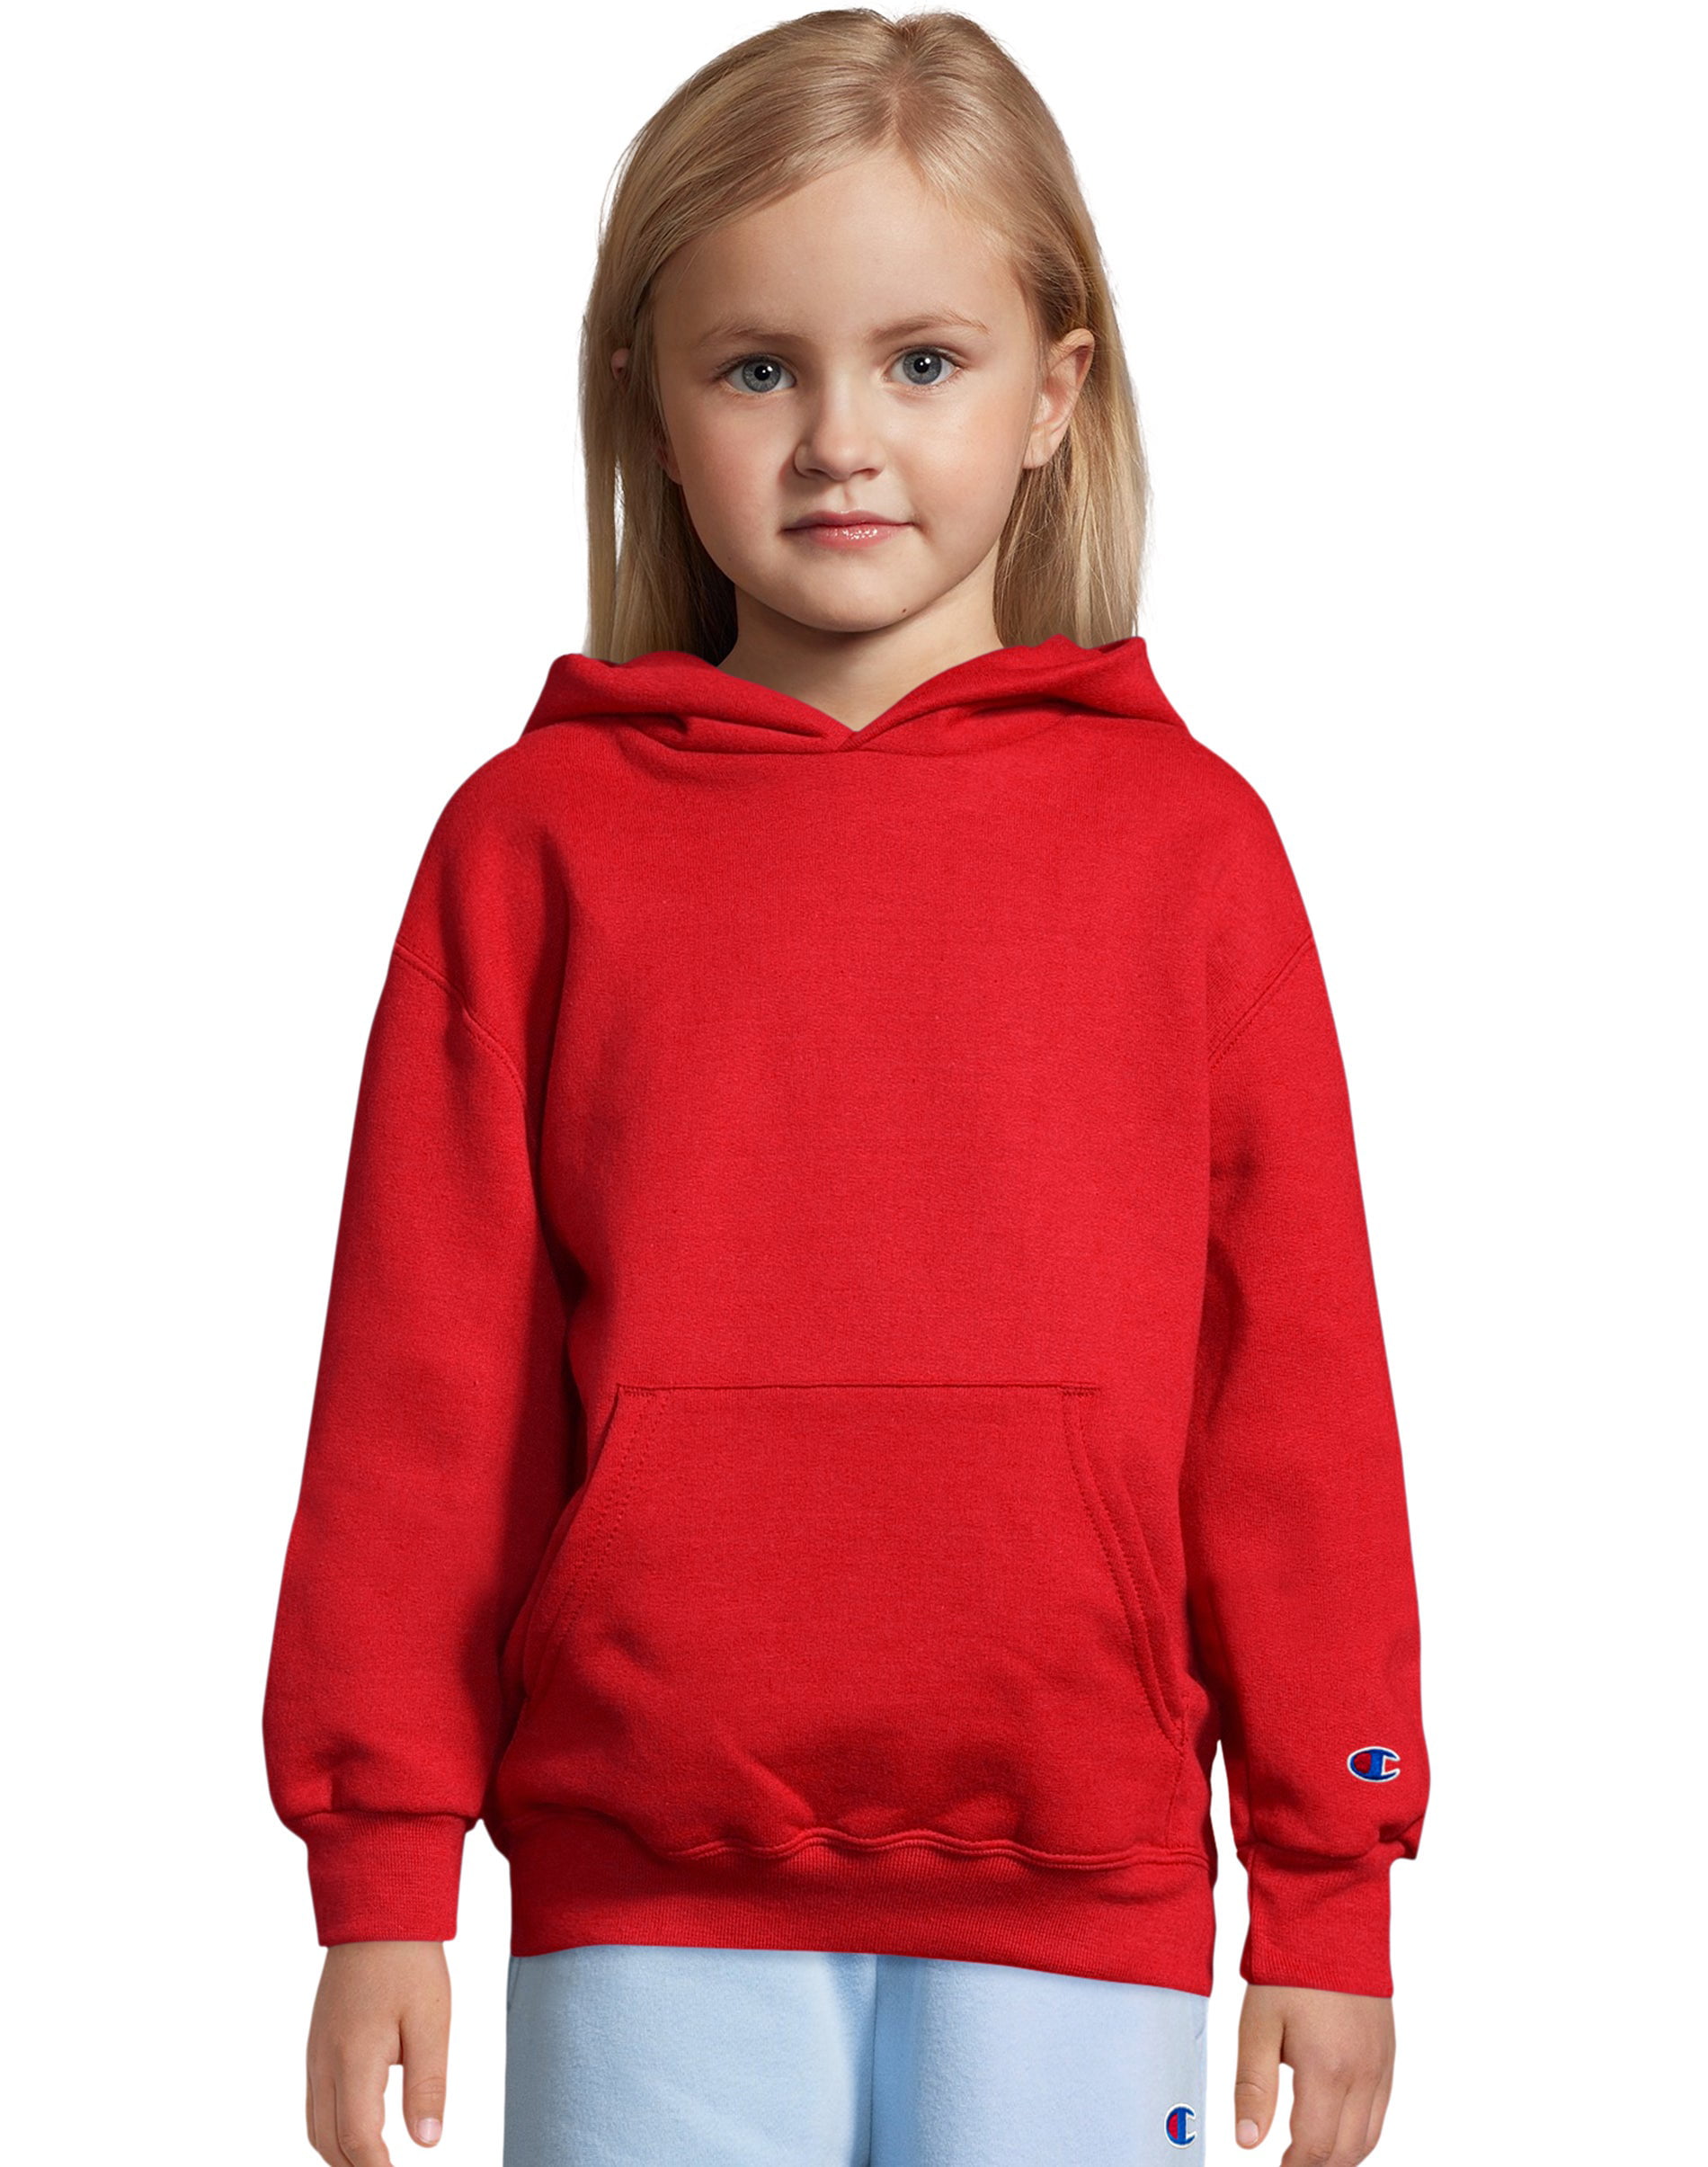 Percussion Unisex Toddler Hoodies Fleece Pull Over Sweatshirt for Boys Girls Kids Youth